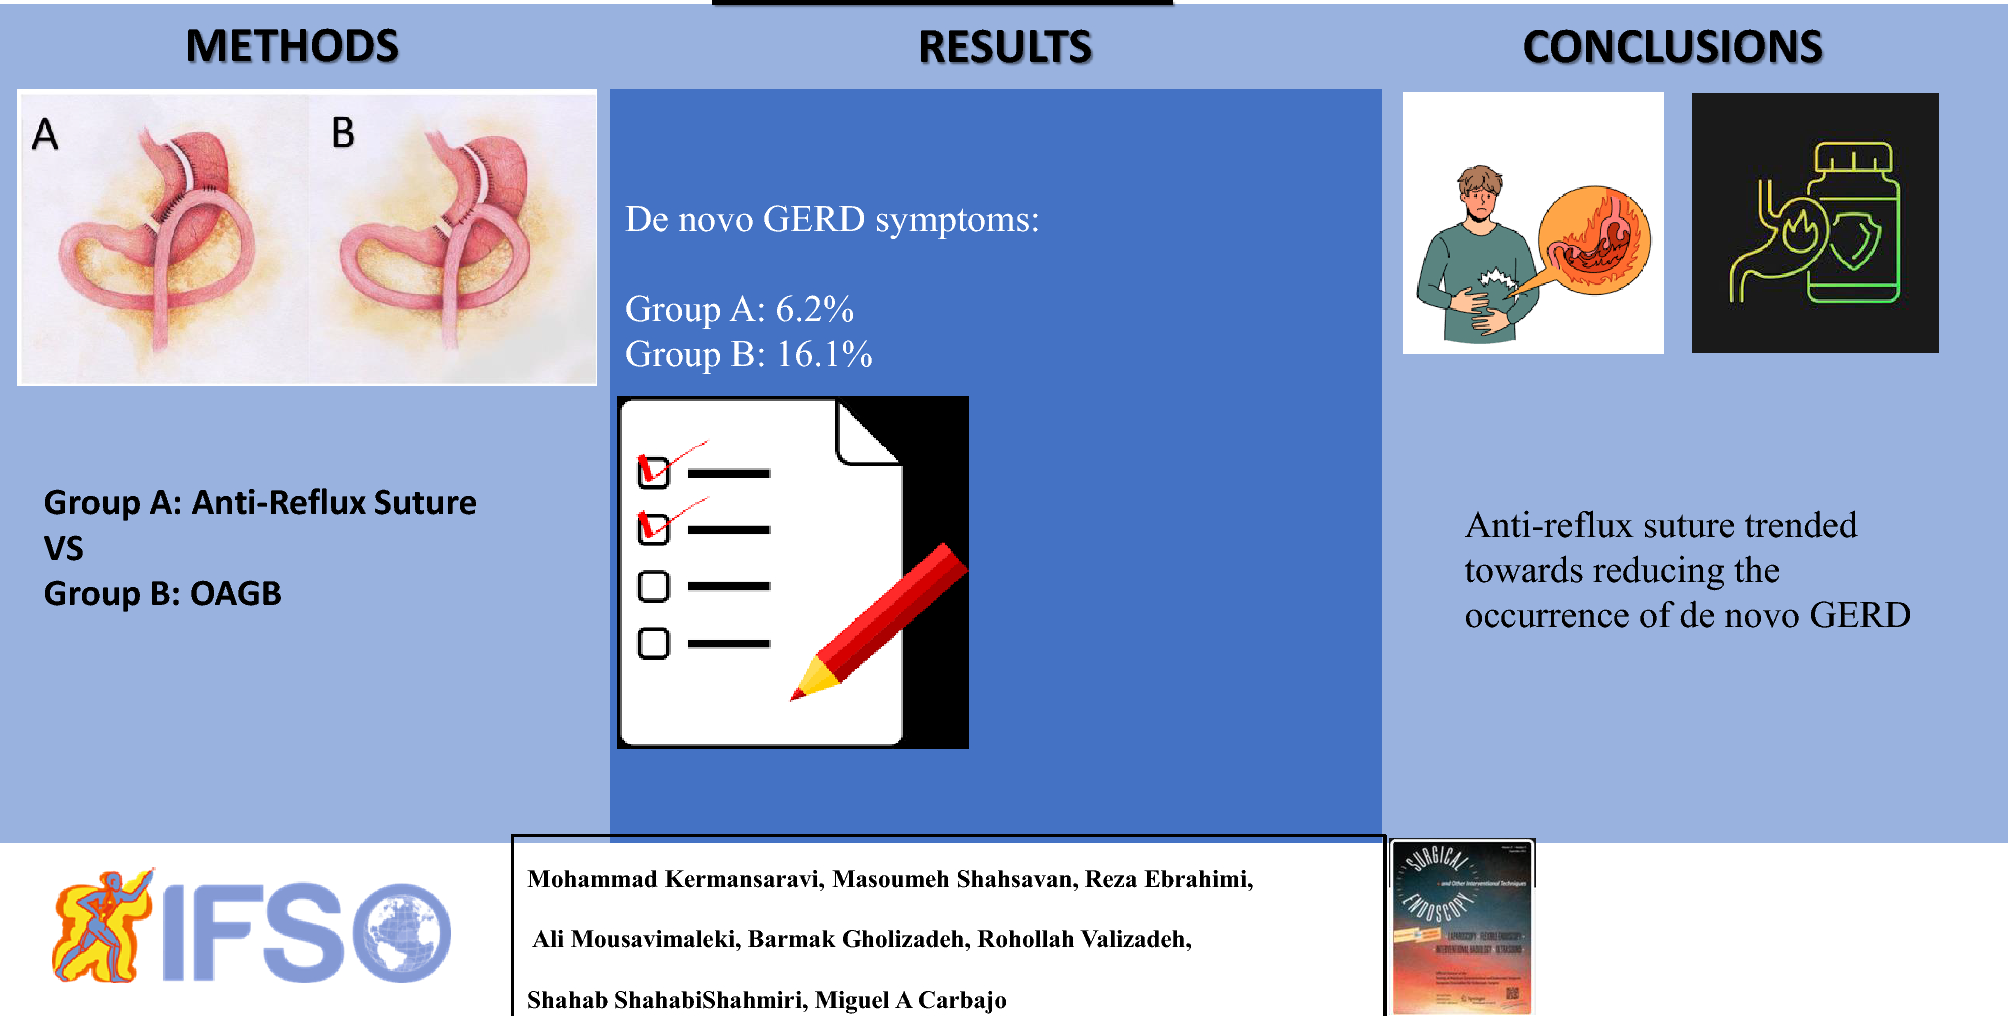 Effect of anti-reflux suture on gastroesophageal reflux symptoms after one anastomosis gastric bypass: a randomized controlled trial